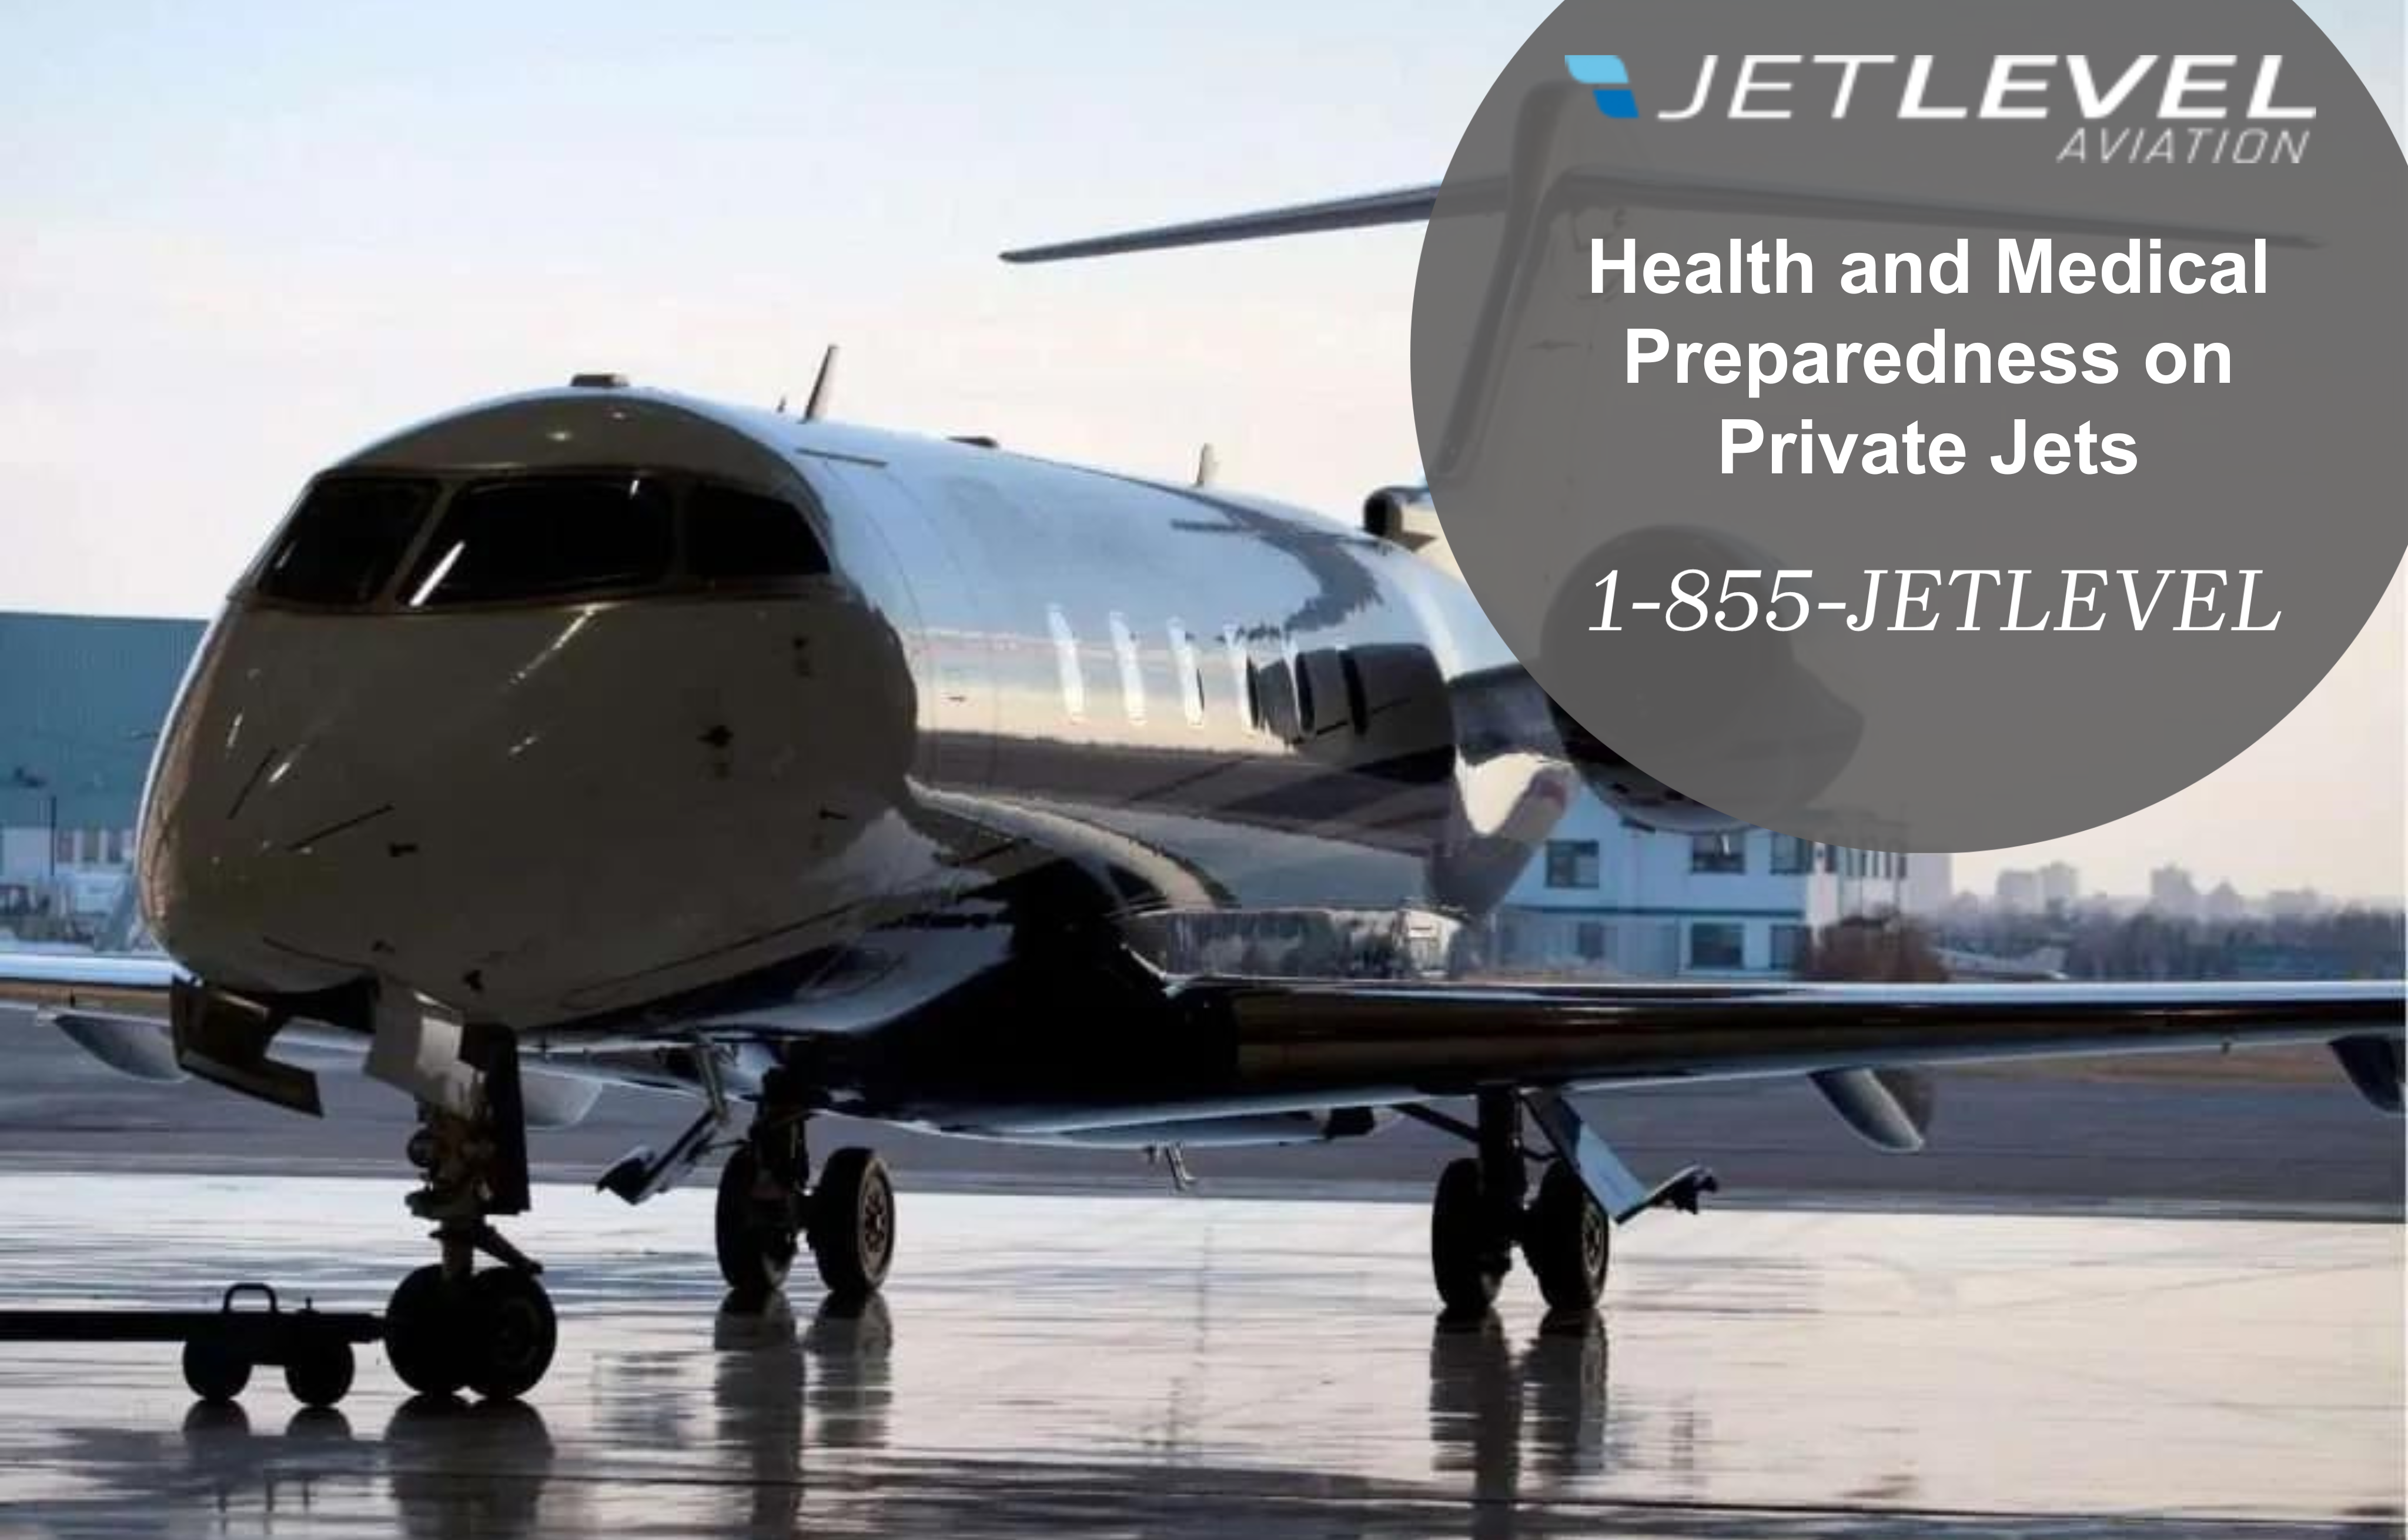 Health and Medical Preparedness on Private Jets